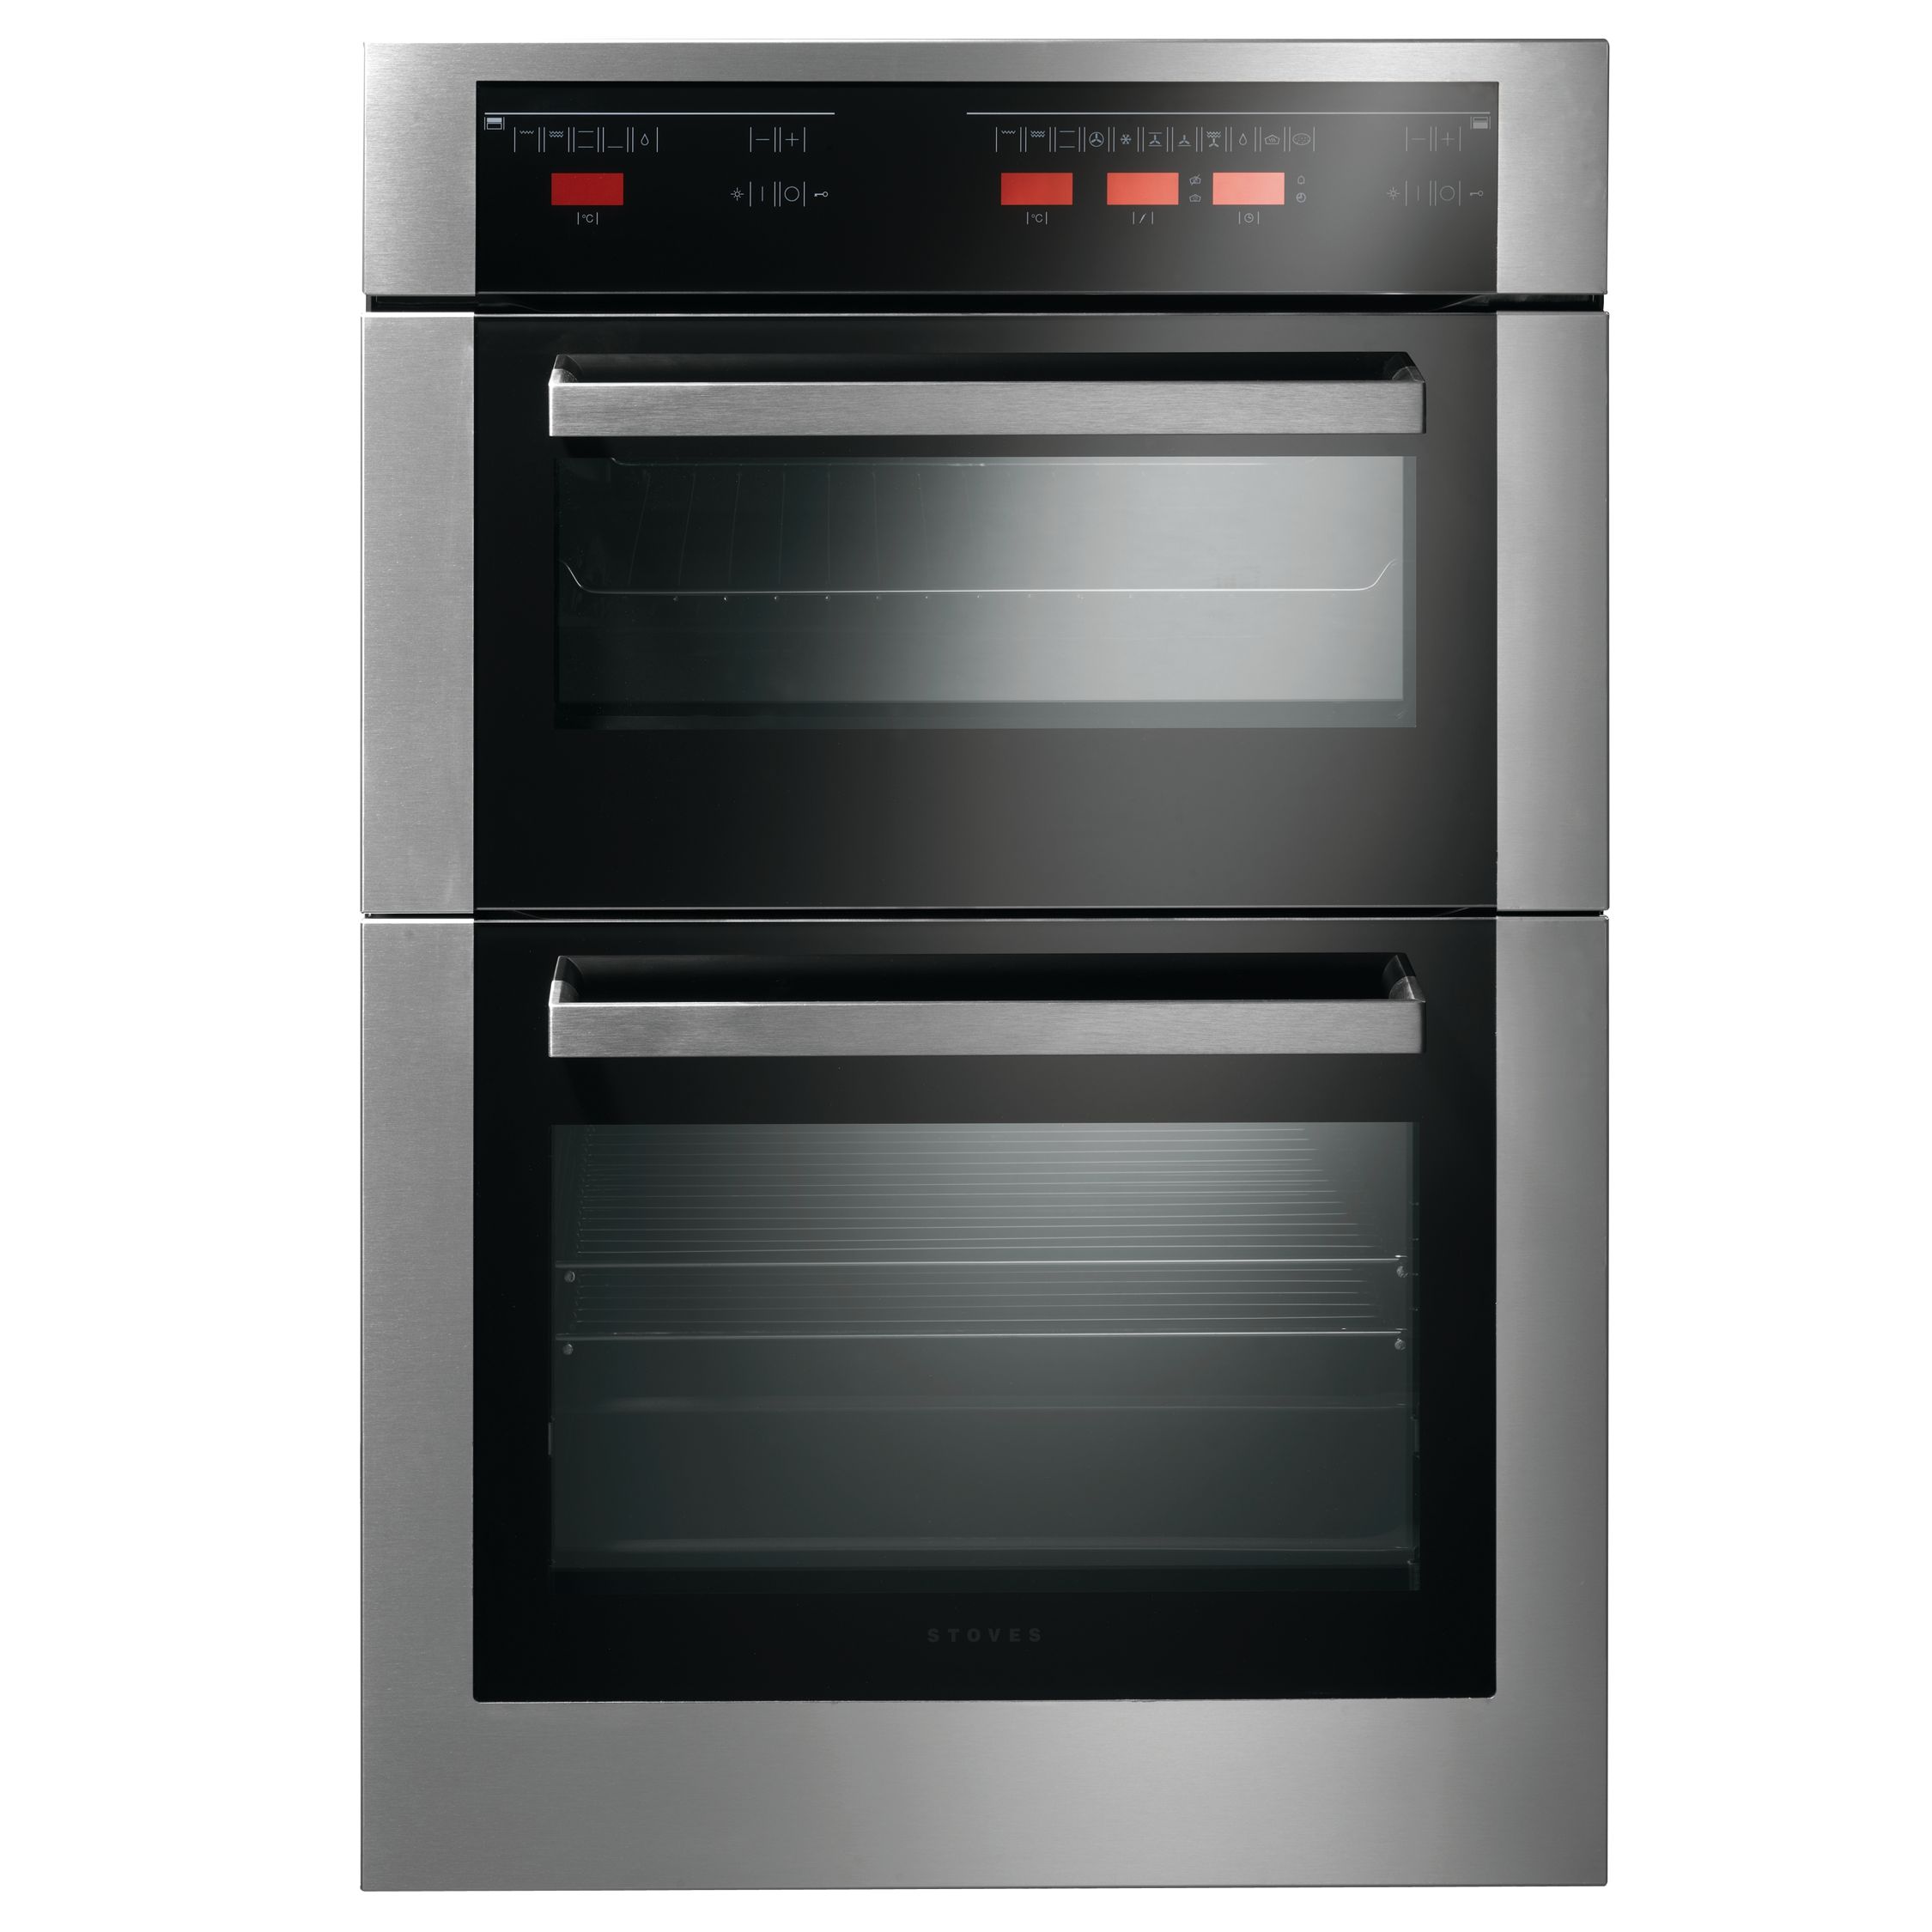 Stoves S7-E900MF Double Electric Oven, Stainless Steel at John Lewis